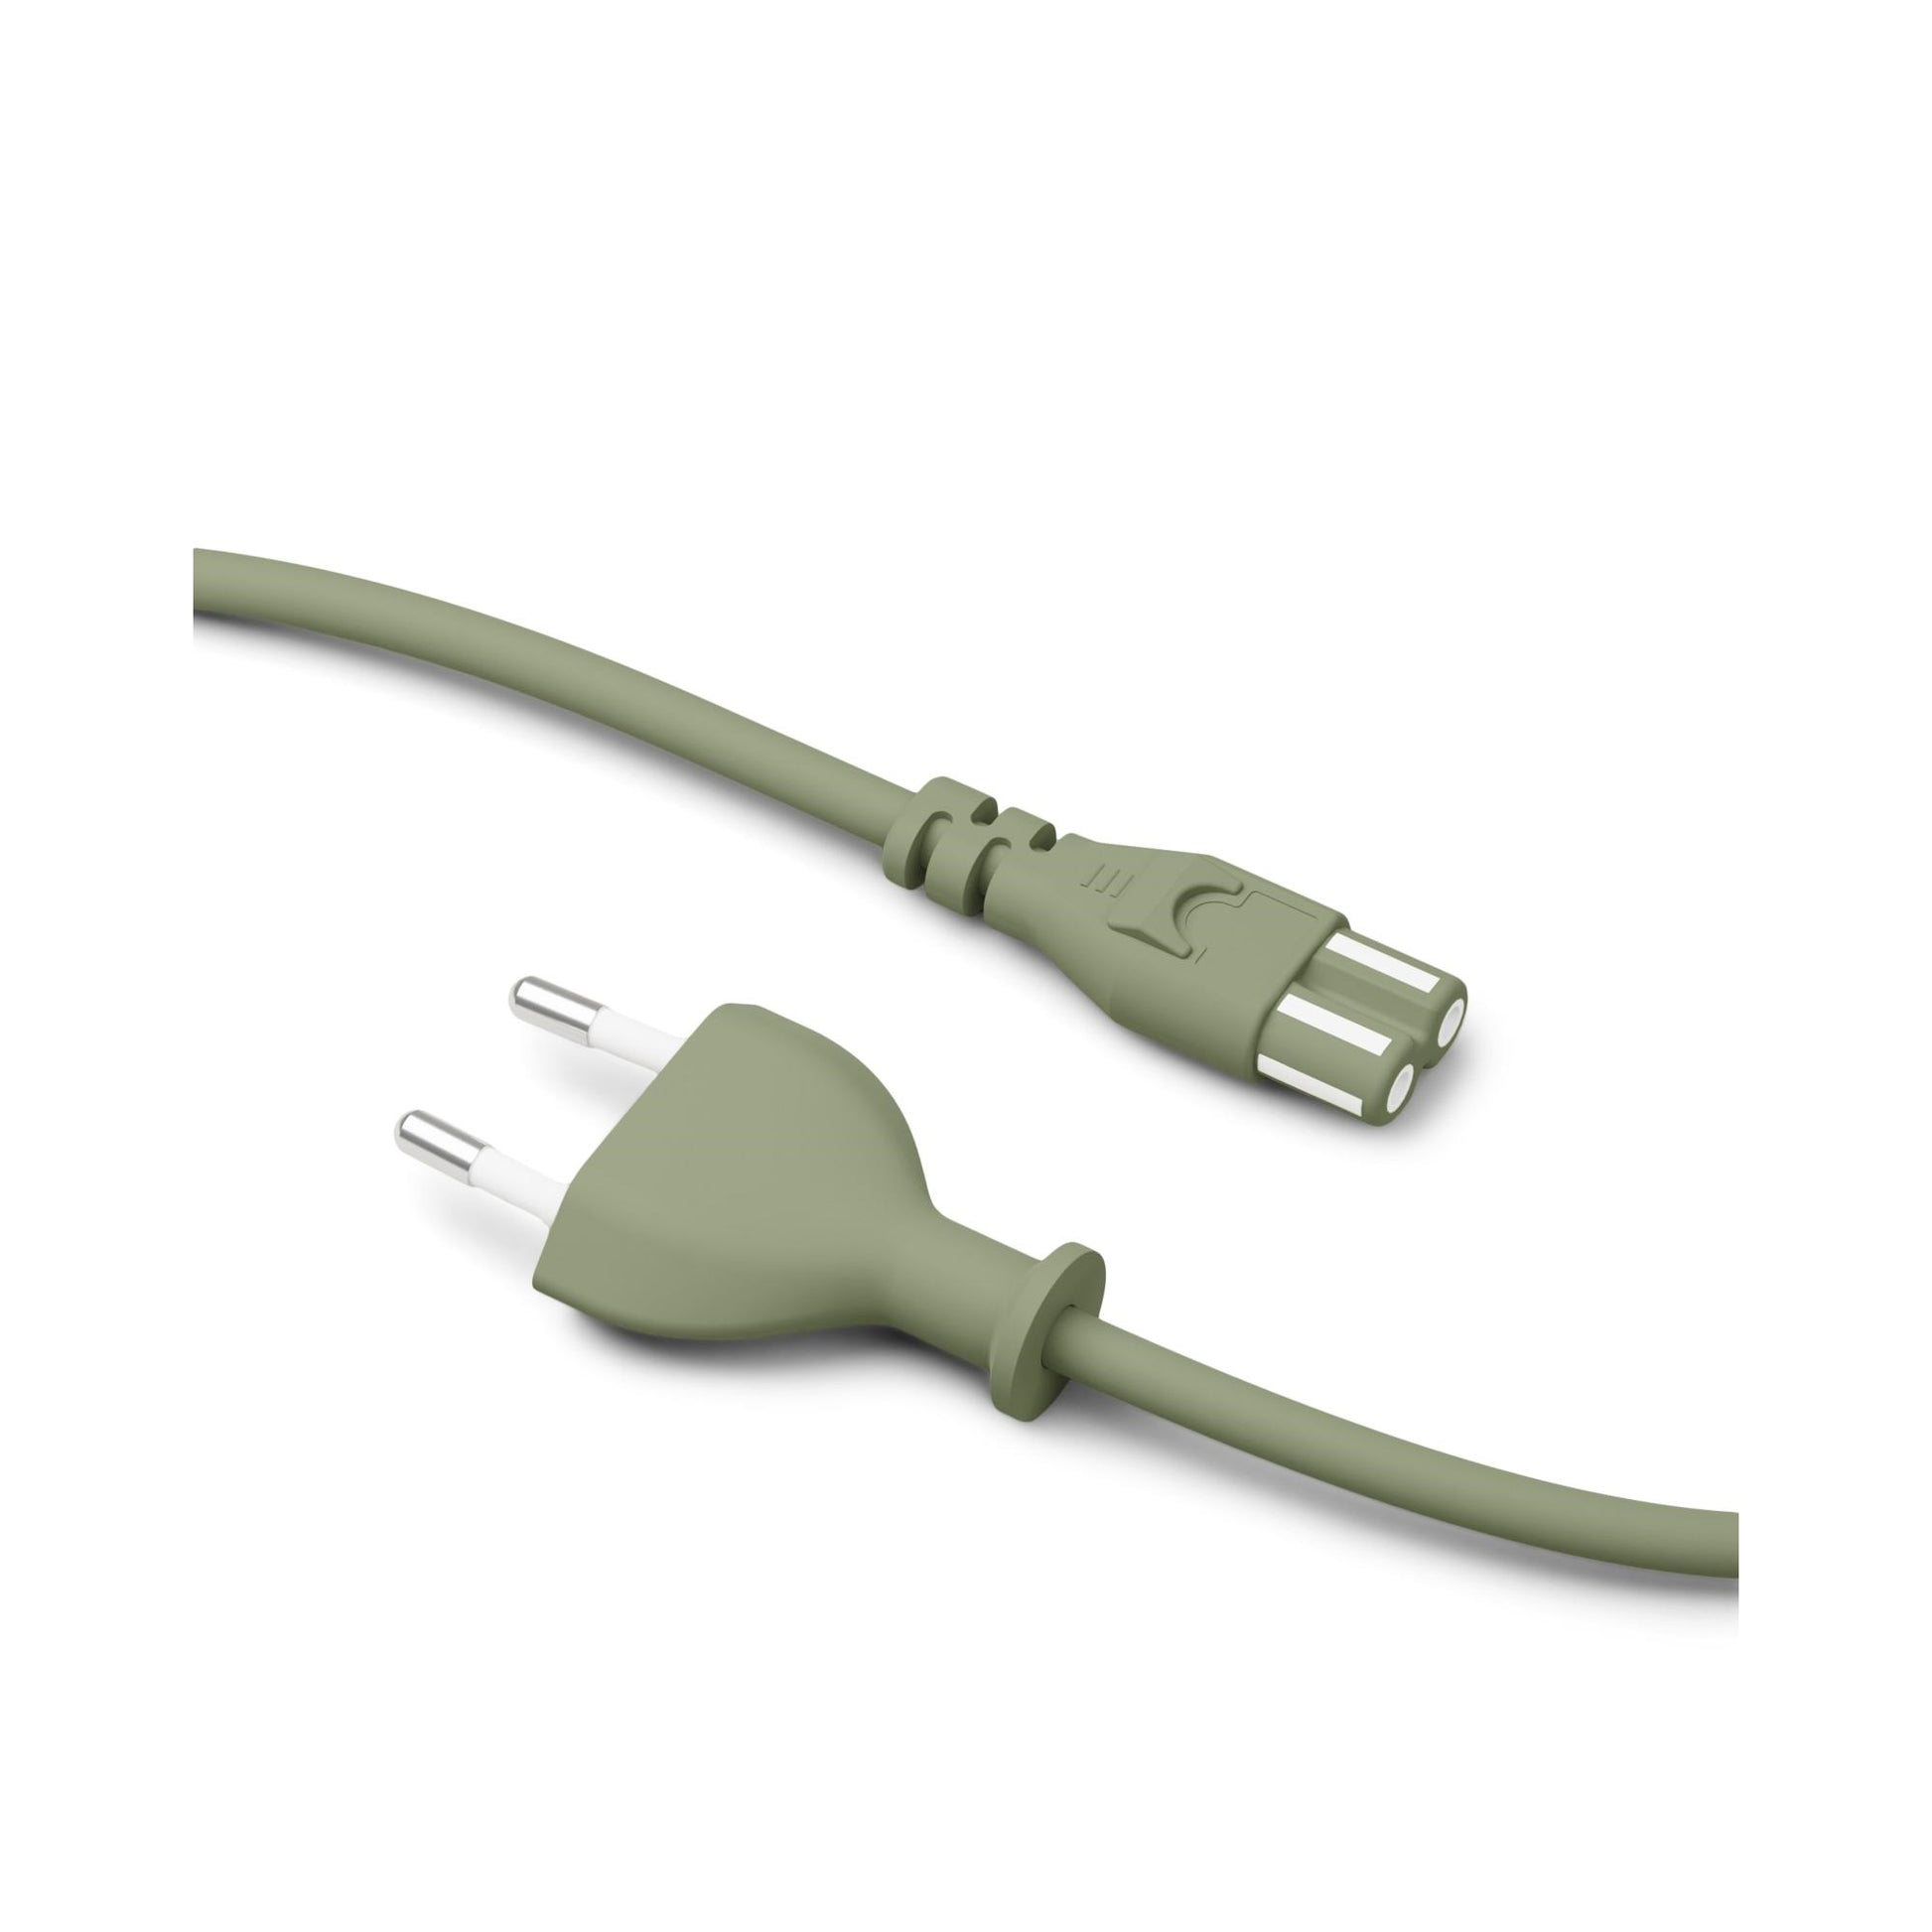 Power Cable 750 cm by Pedestal #Mossy Green